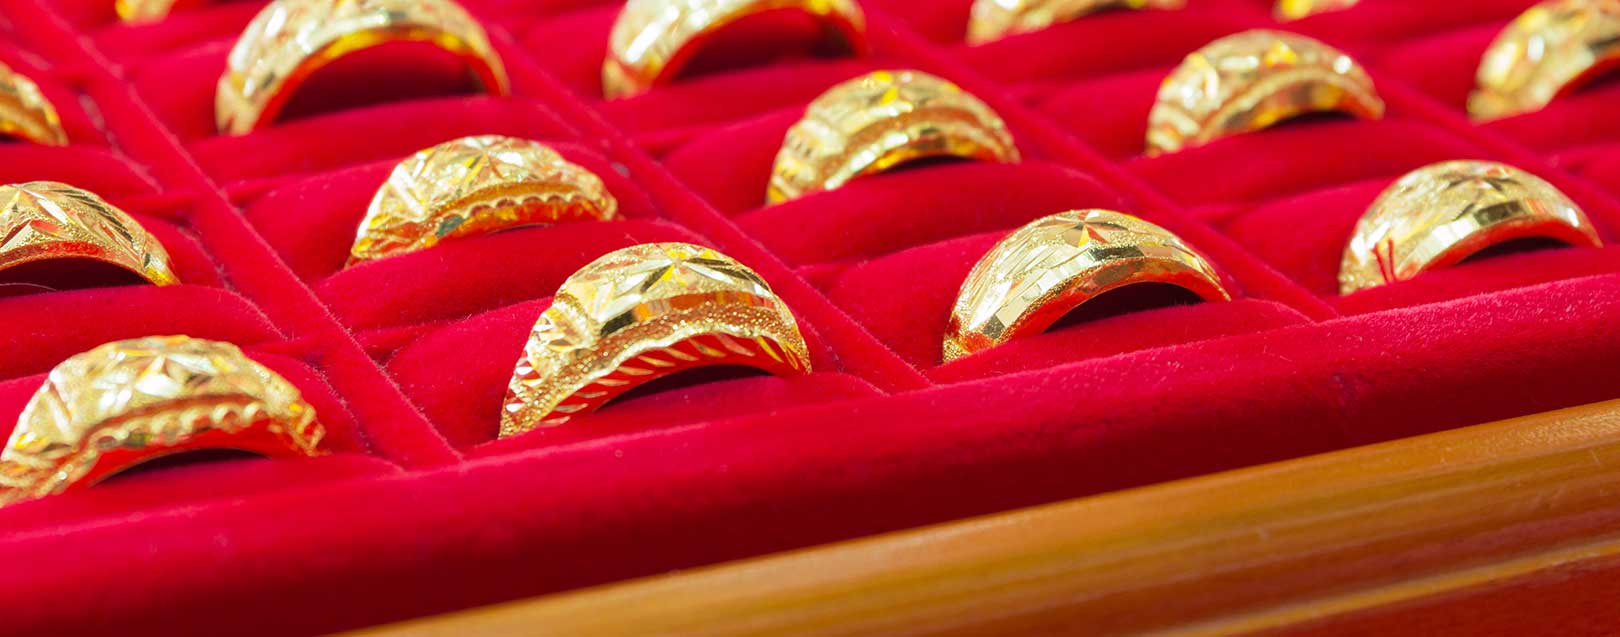 Gold imports decline 39% to $1.47 bn in May